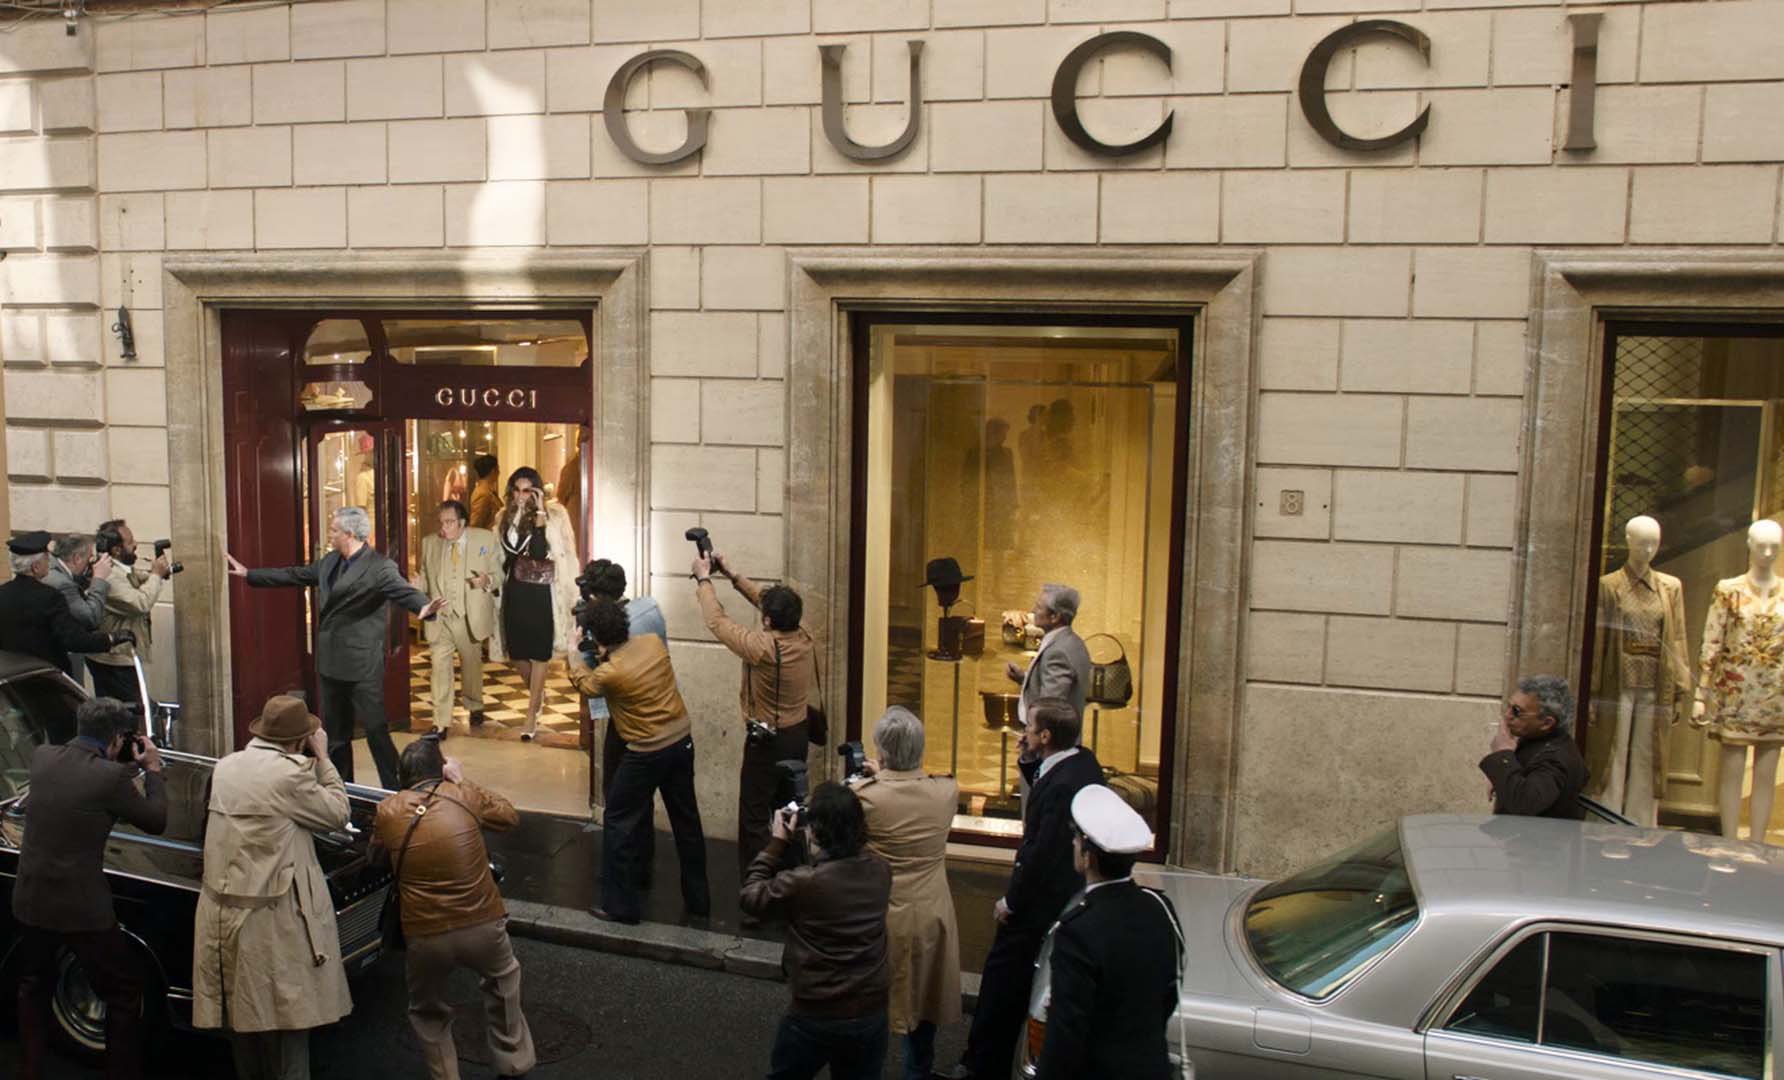 Morgen Slagter blod gucci on Twitter: "Spotted in a scene from the second official trailer for  the forthcoming @HouseOfGucciMov is the Gucci flagship boutique in Rome on  Via Condotti. #HouseOfGucci https://t.co/EjqbWFdiES" / Twitter